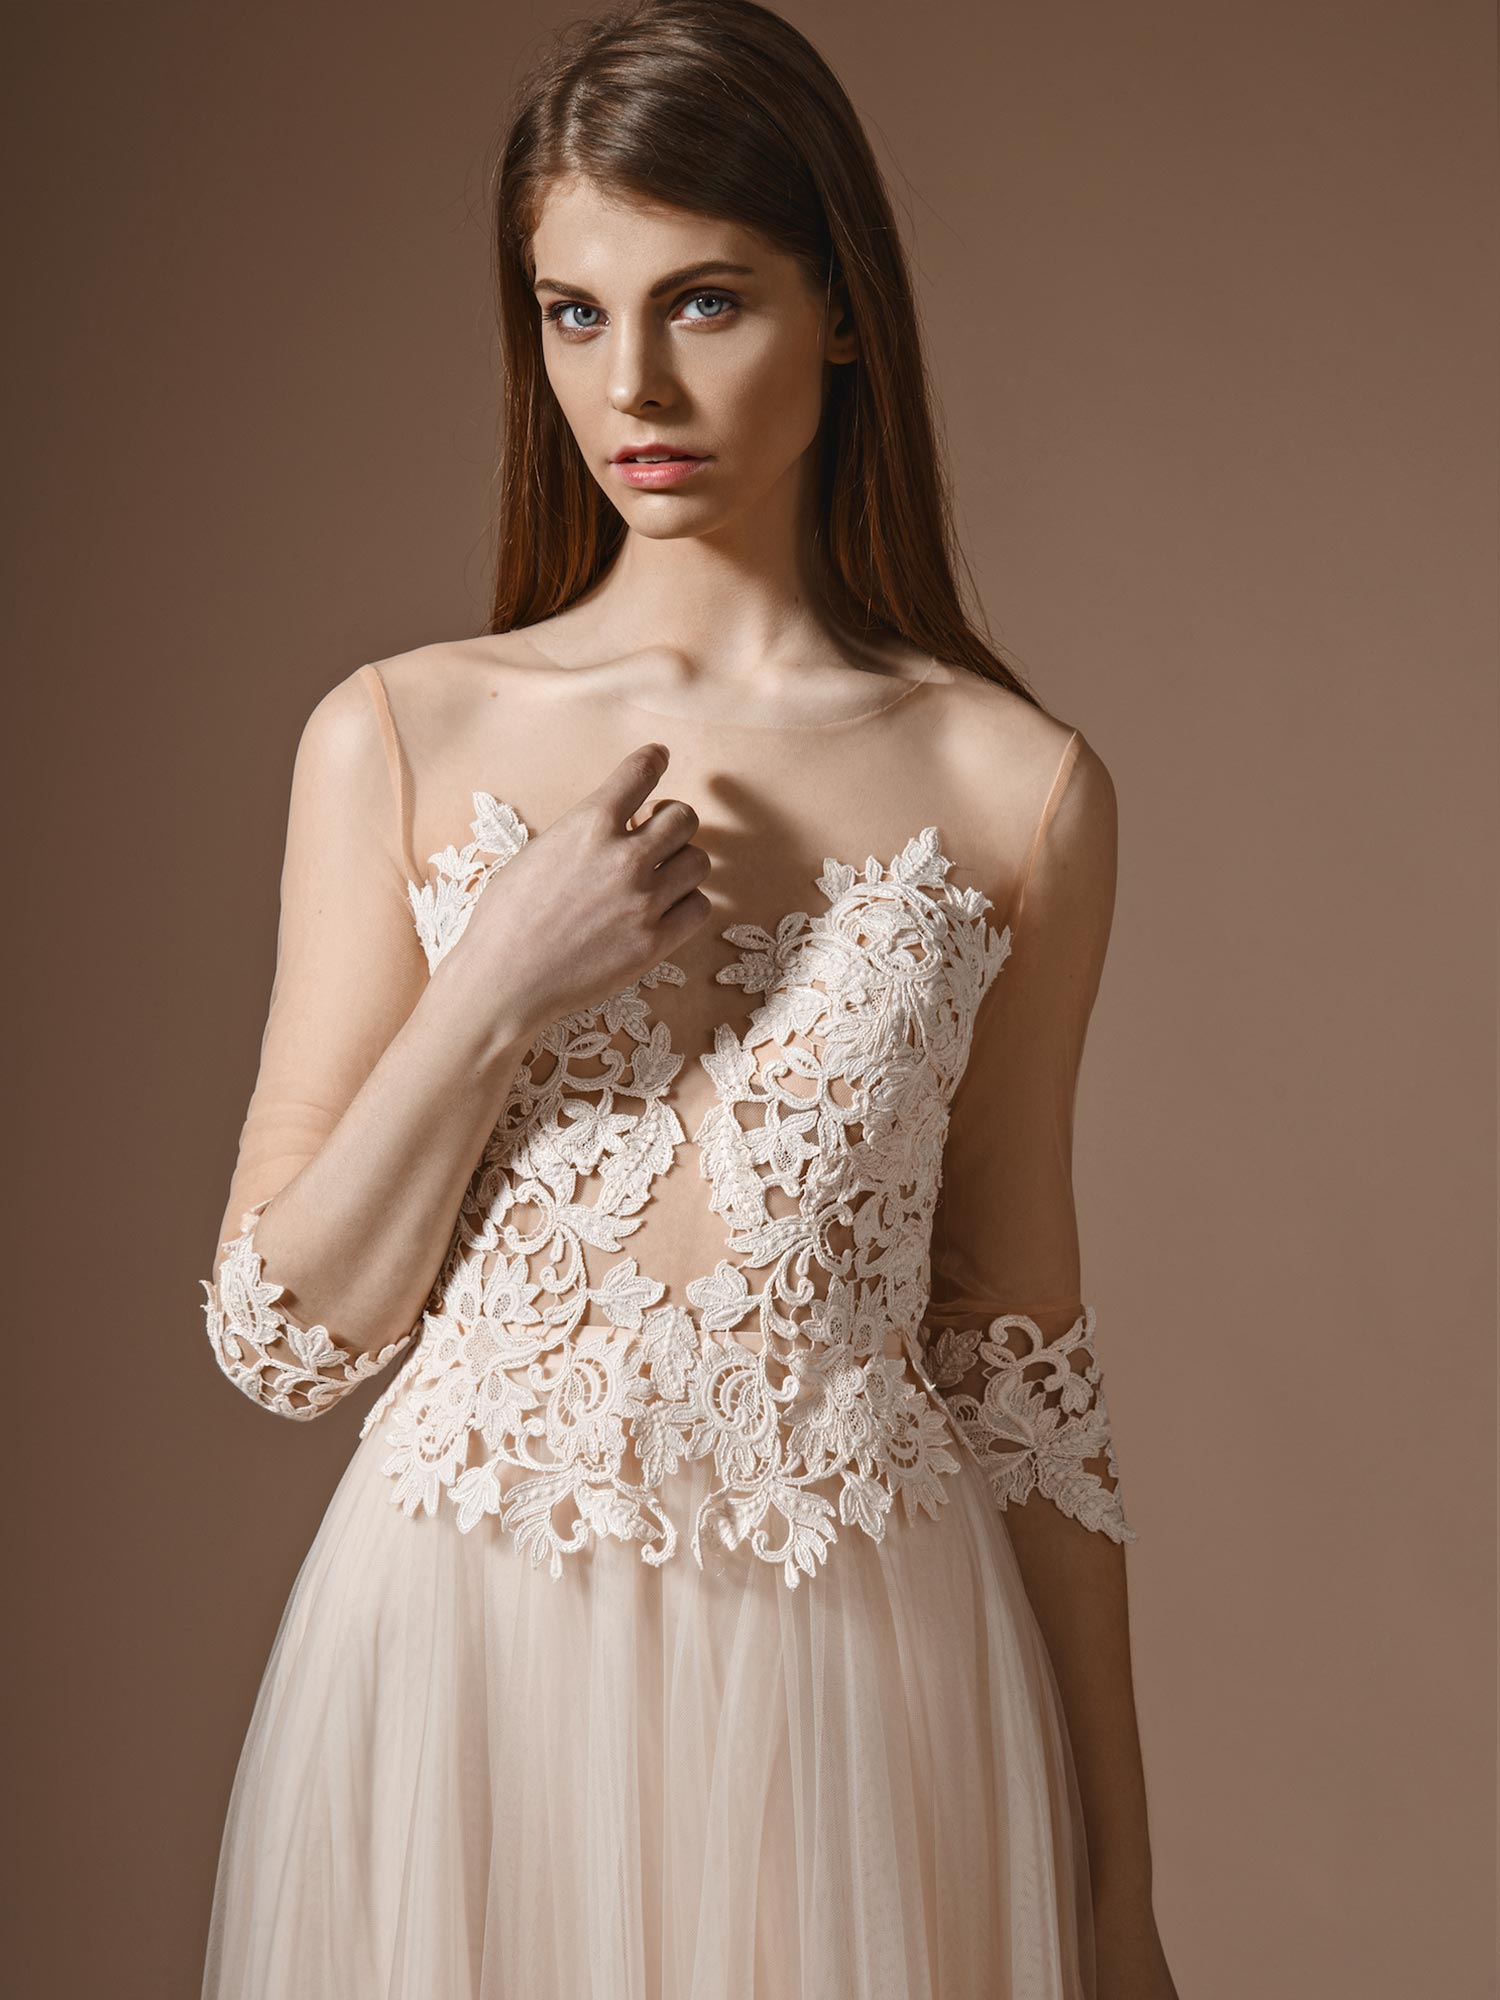 Best Short Sleeve A Line Wedding Dress  The ultimate guide 